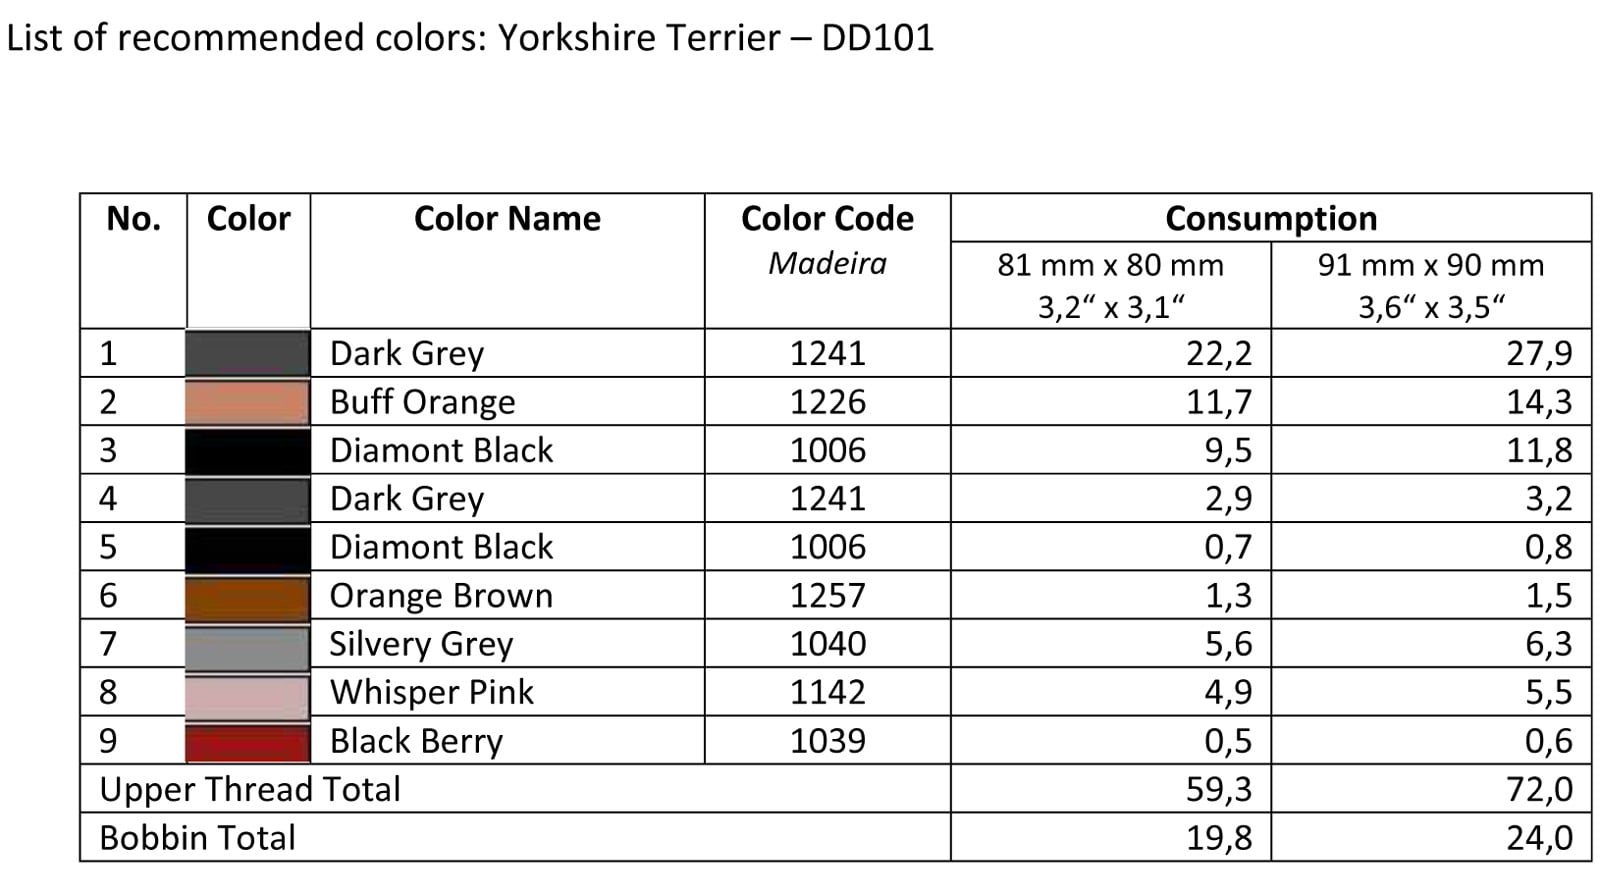 List of Recommended Colors - Yorkshire Terrier - DD101